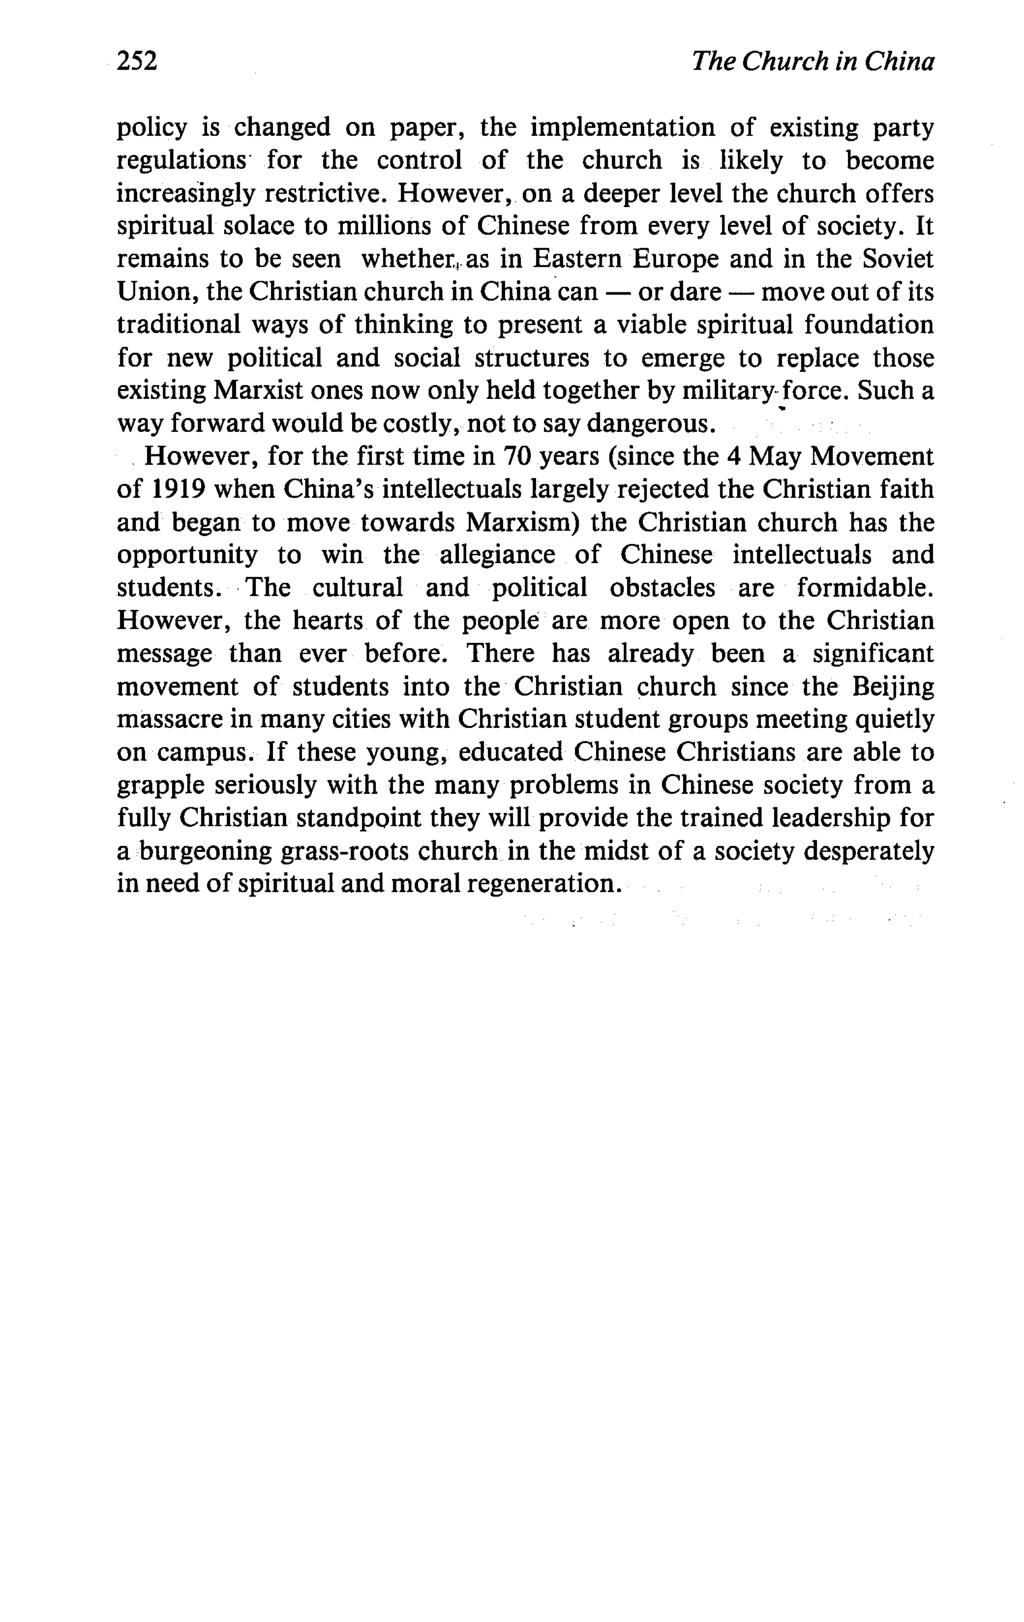 252 The Church in China policy is changed on paper, the implementation of existing party regulations for the control of the church is likely to become increasingly restrictive.